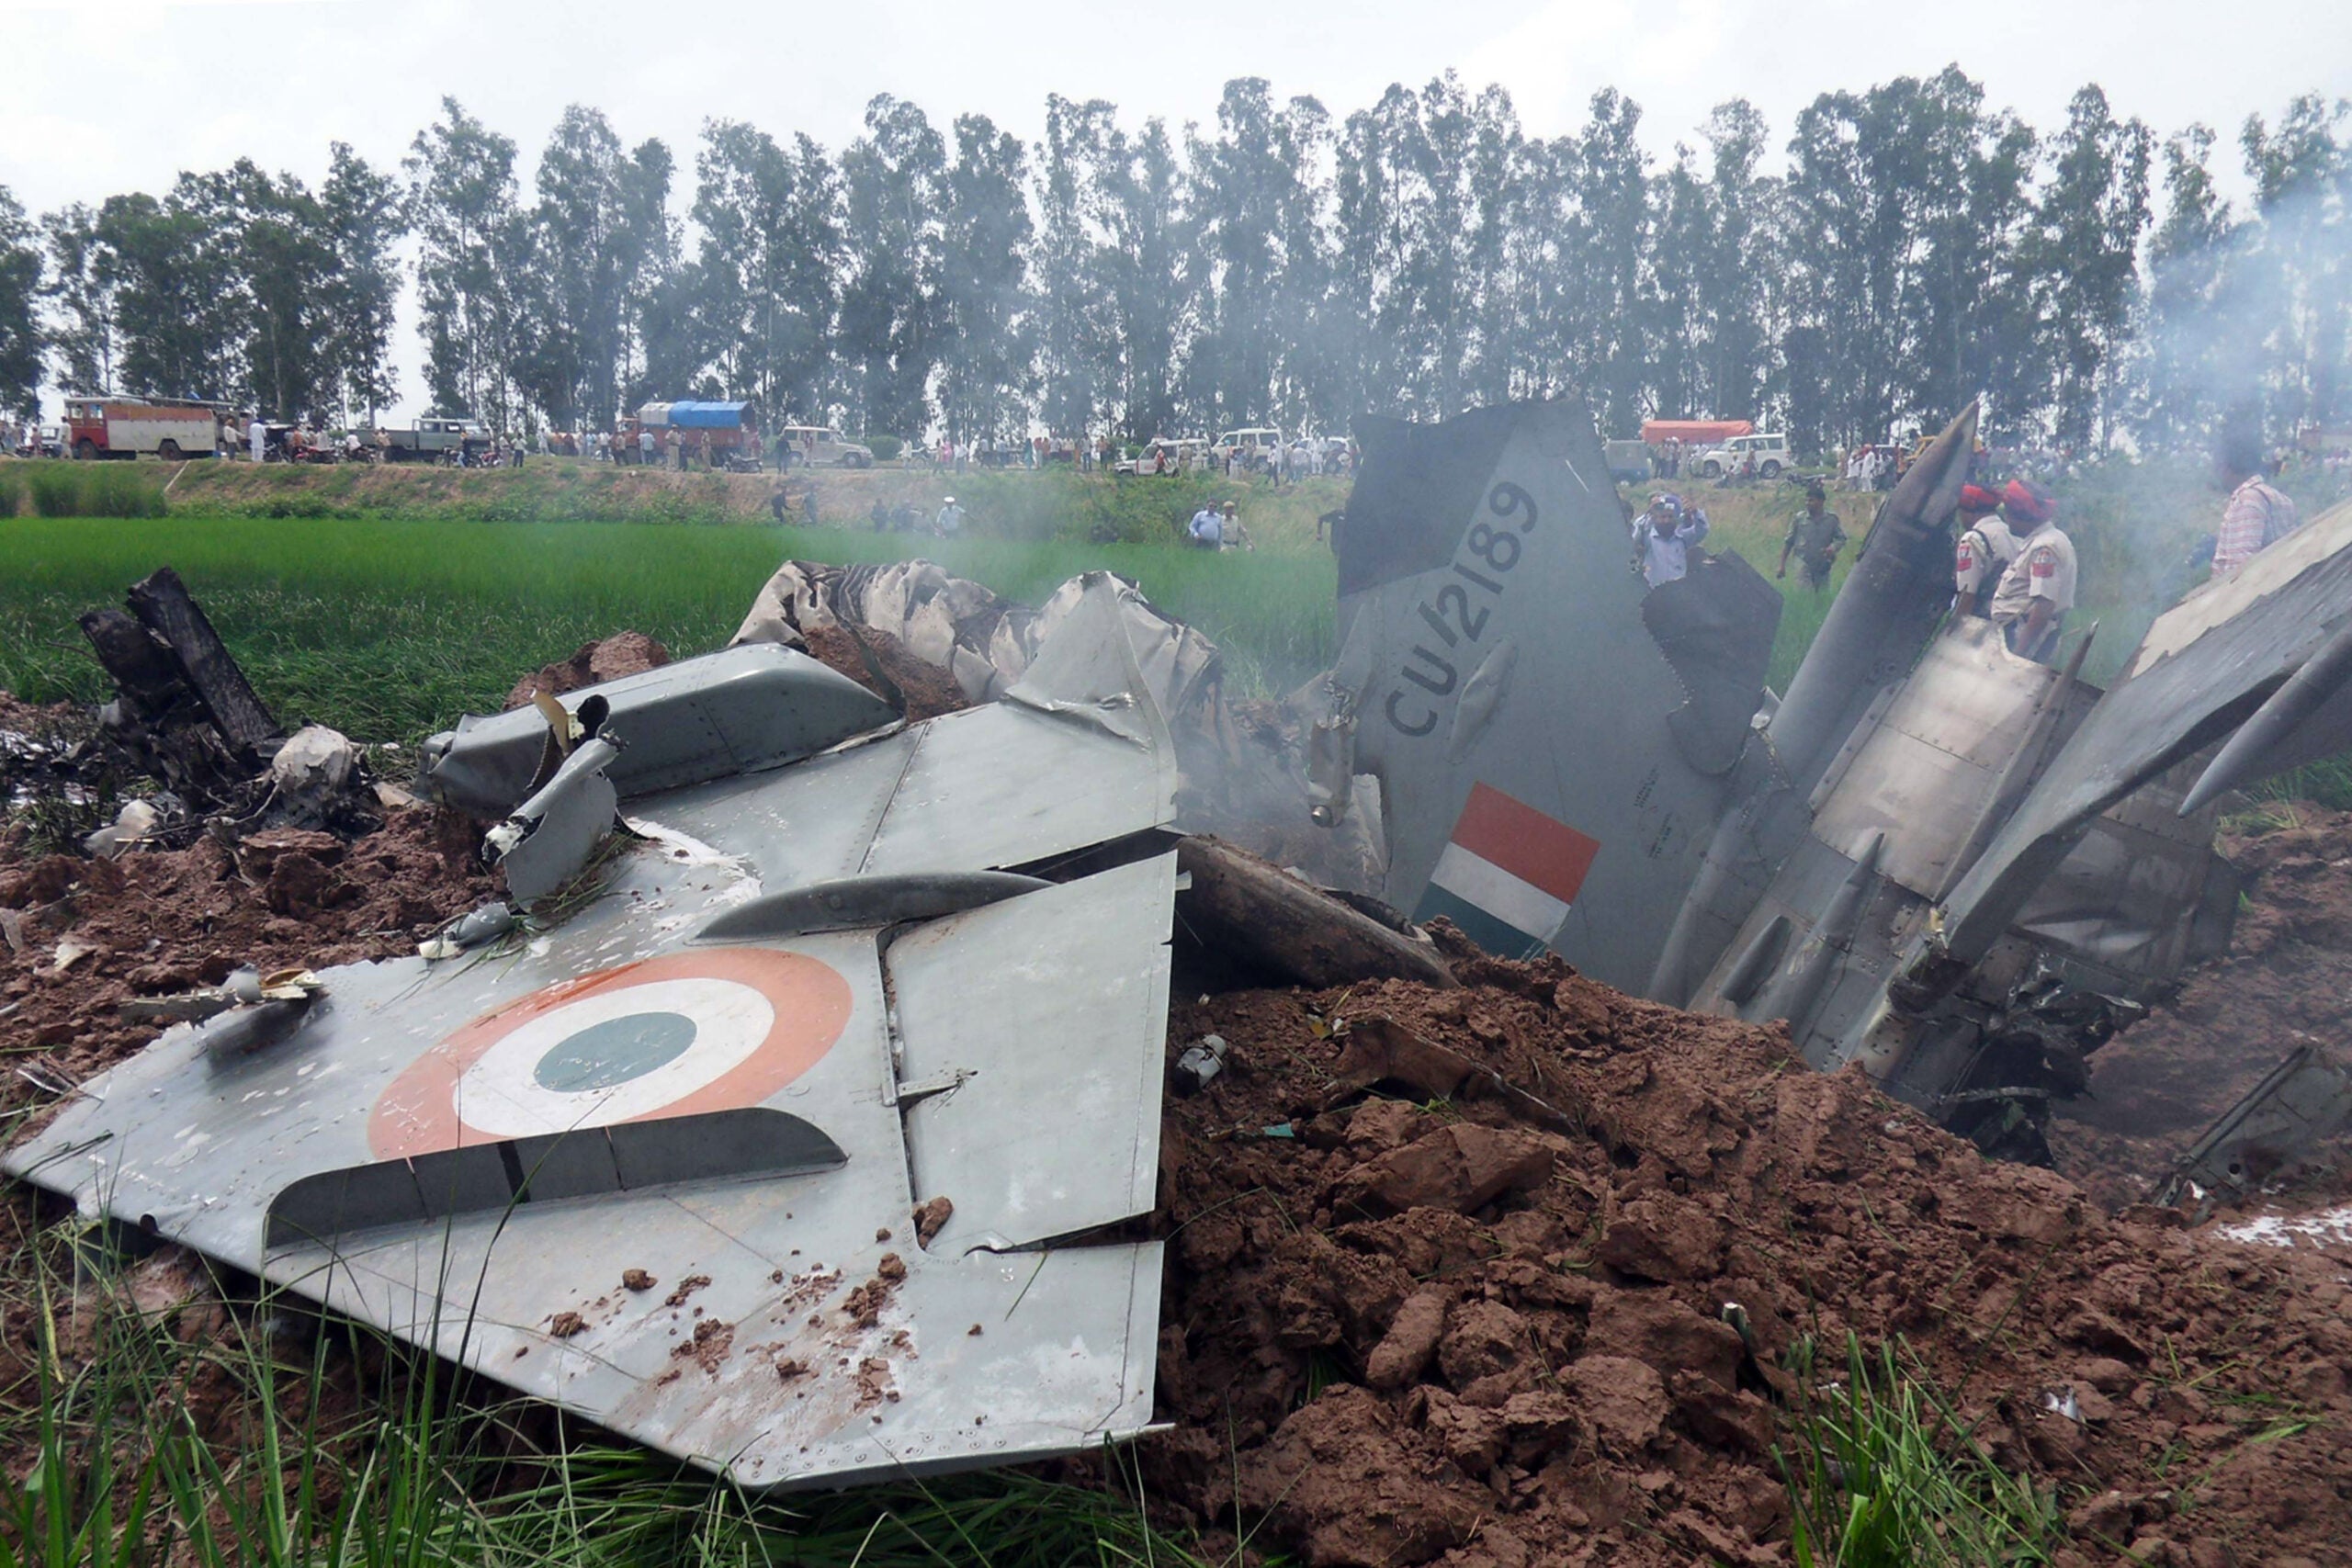 Indian Air Force personnel stand by the wreckage of a MiG-21 aircraft that crashed in a field in Rajgarh, in Patiala district on September 6, 2011. An Indian air force MiG-21 fighter jet crashed in the northern state of Punjab, the pilot ejected safely, causing no casualties. The Russian-designed jet came down near the town of Rajpura, some 30 kms from Patiala. AFP PHOTO/STR (Photo credit should read STR/AFP via Getty Images)